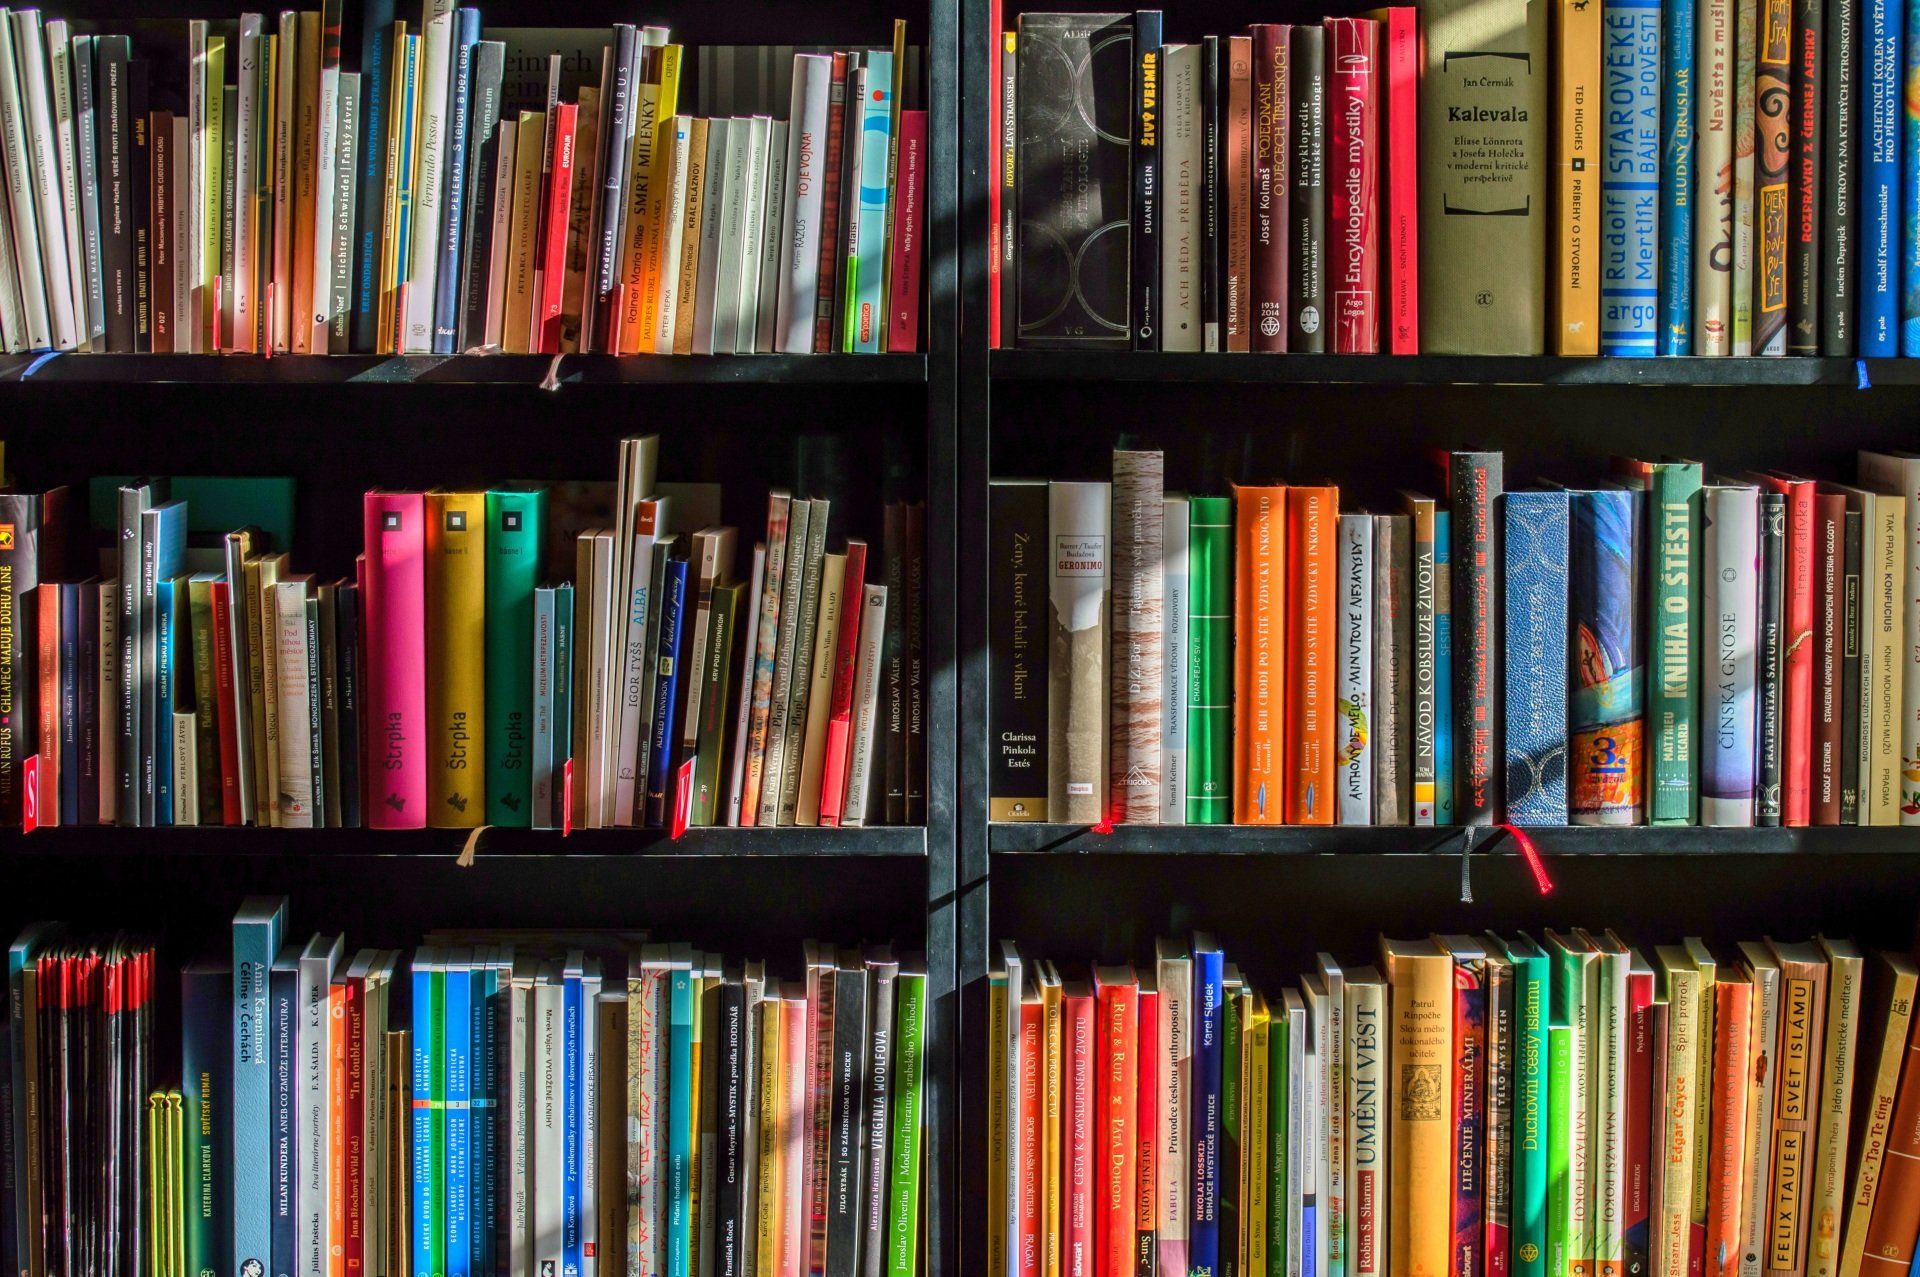 Photo of tall bookshelf filled with an assortment of colorful books.